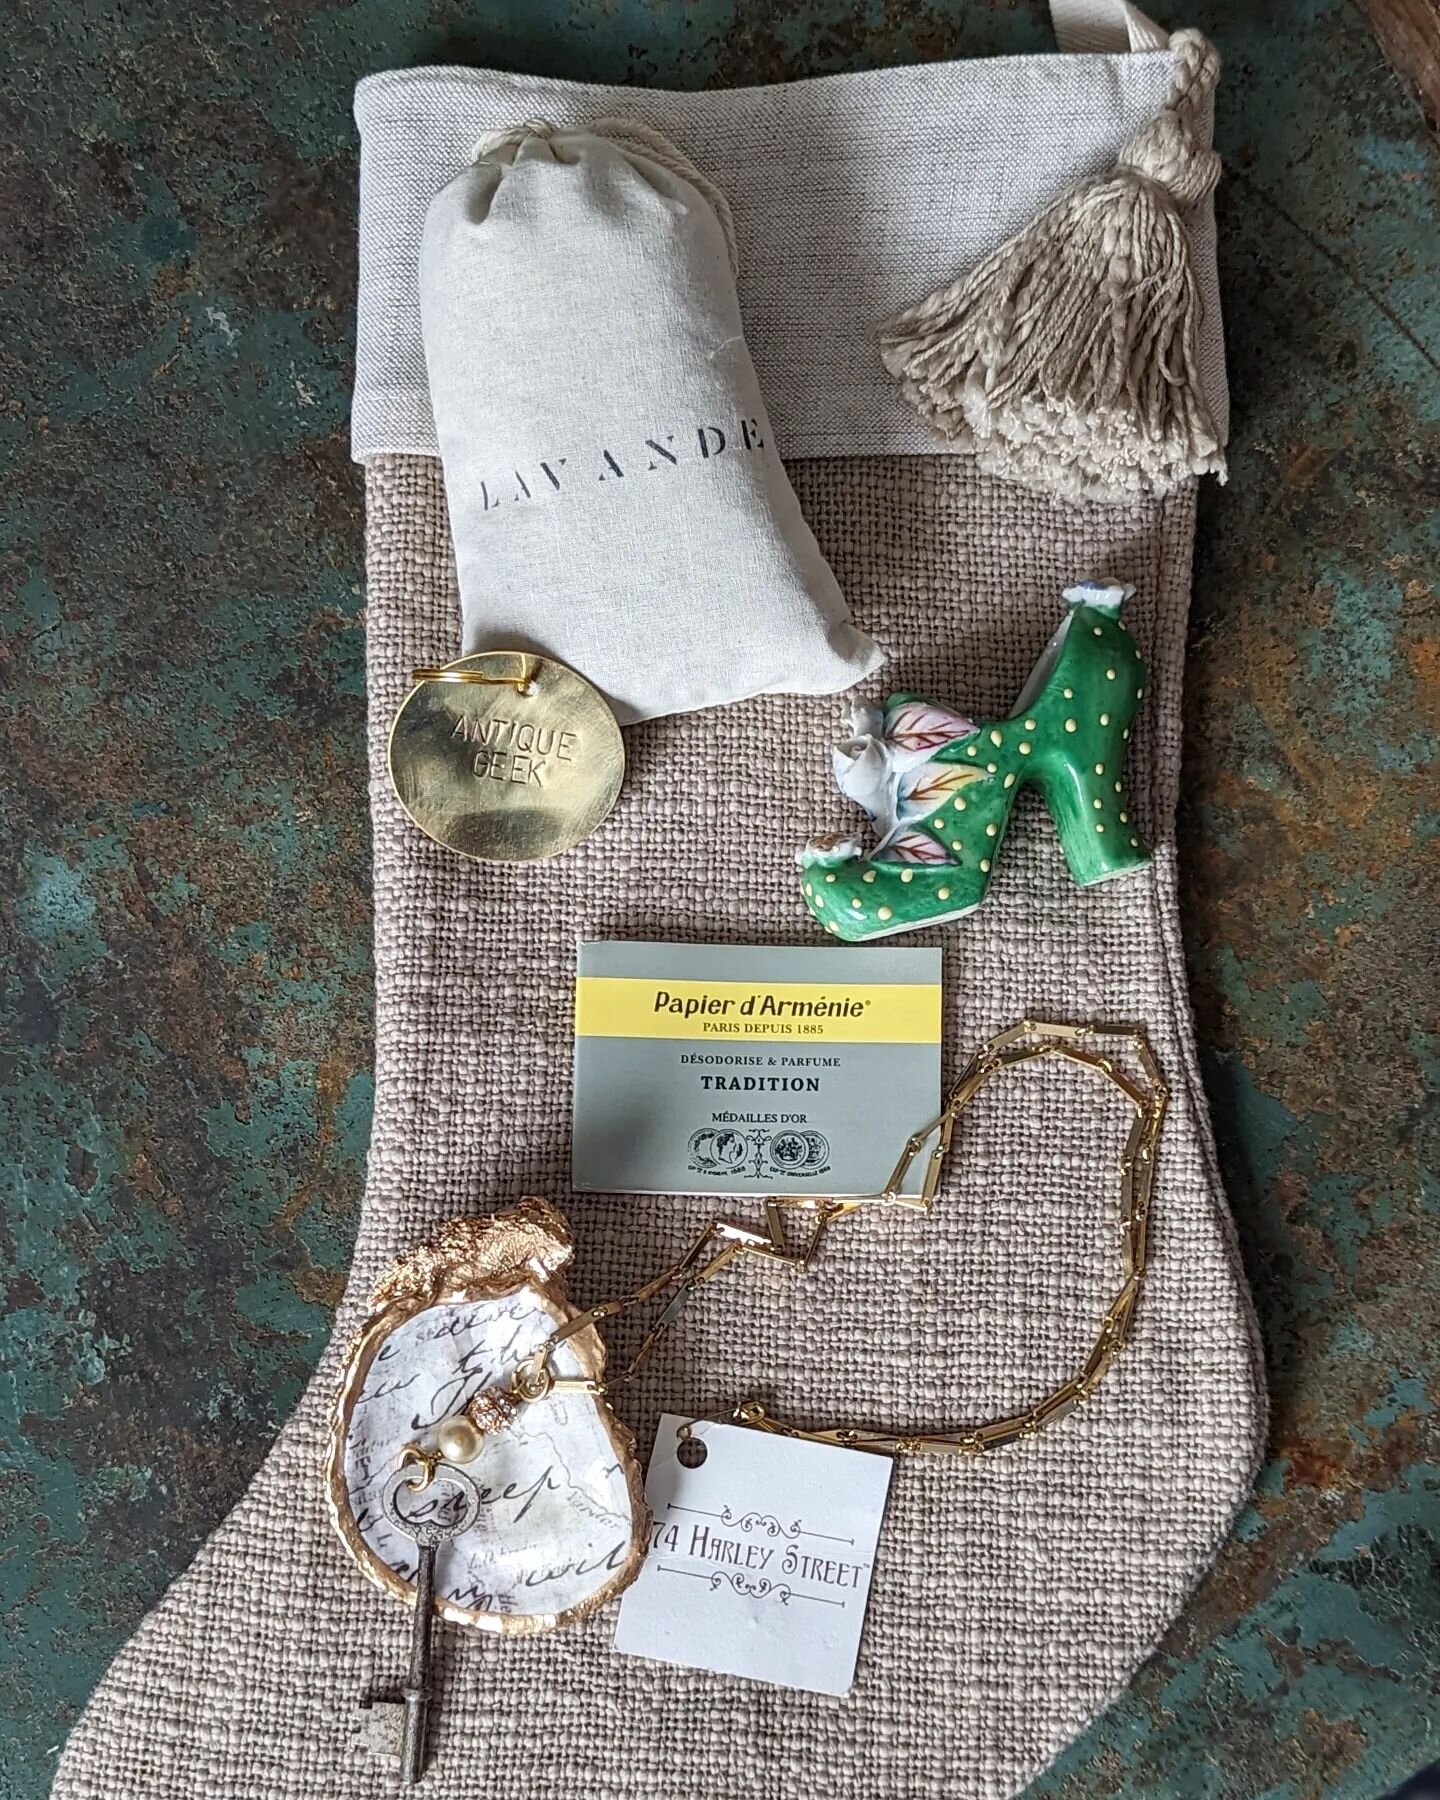 Stocking stuffers for the Antique Greek in your life. We're open today and tomorrow!